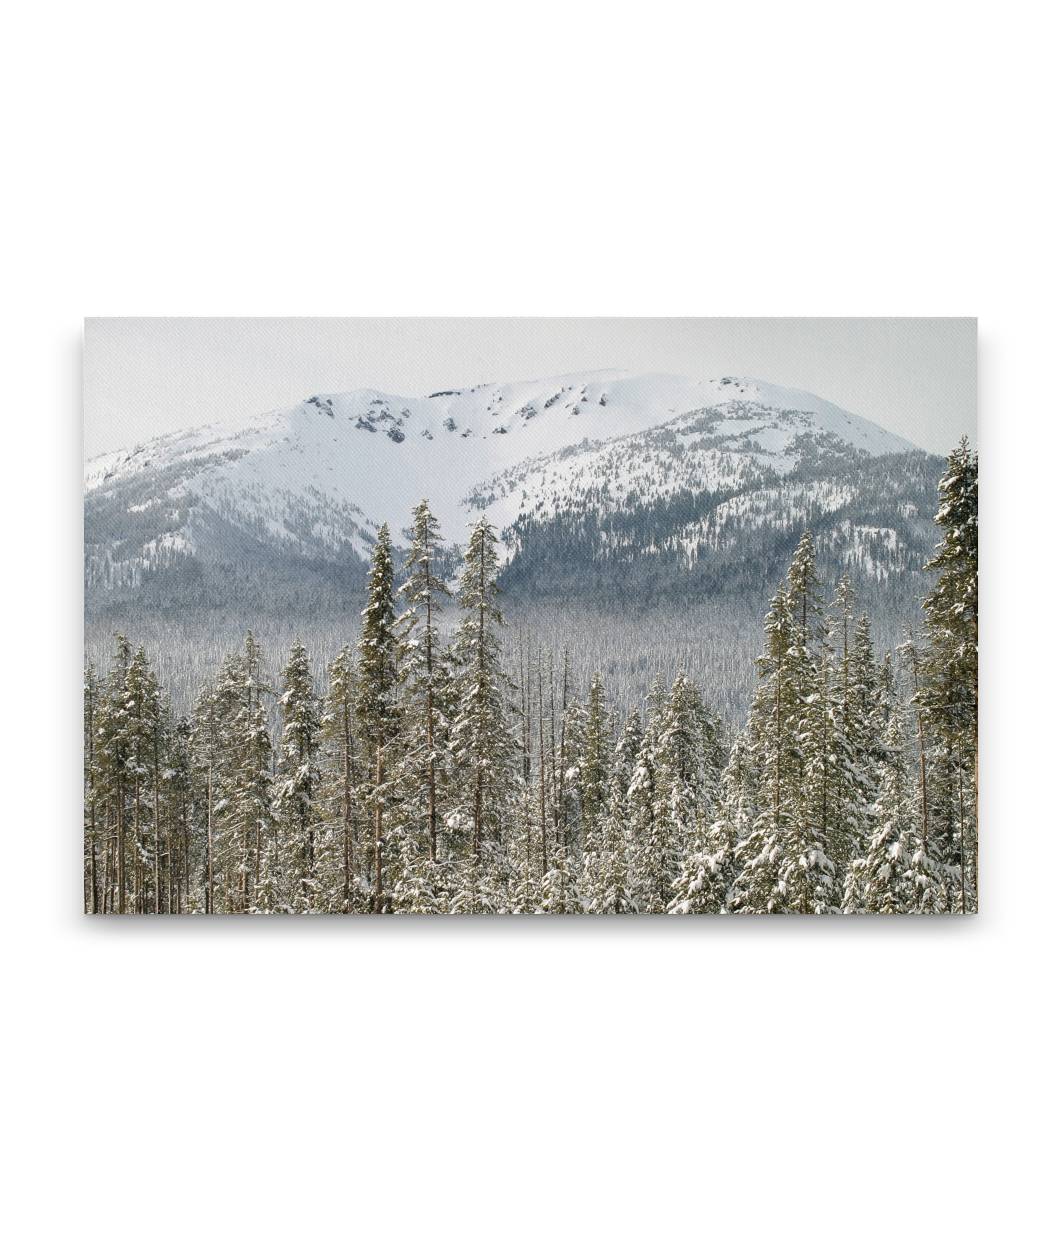 Mount Bailey and Evergreen Forest in Winter, Oregon